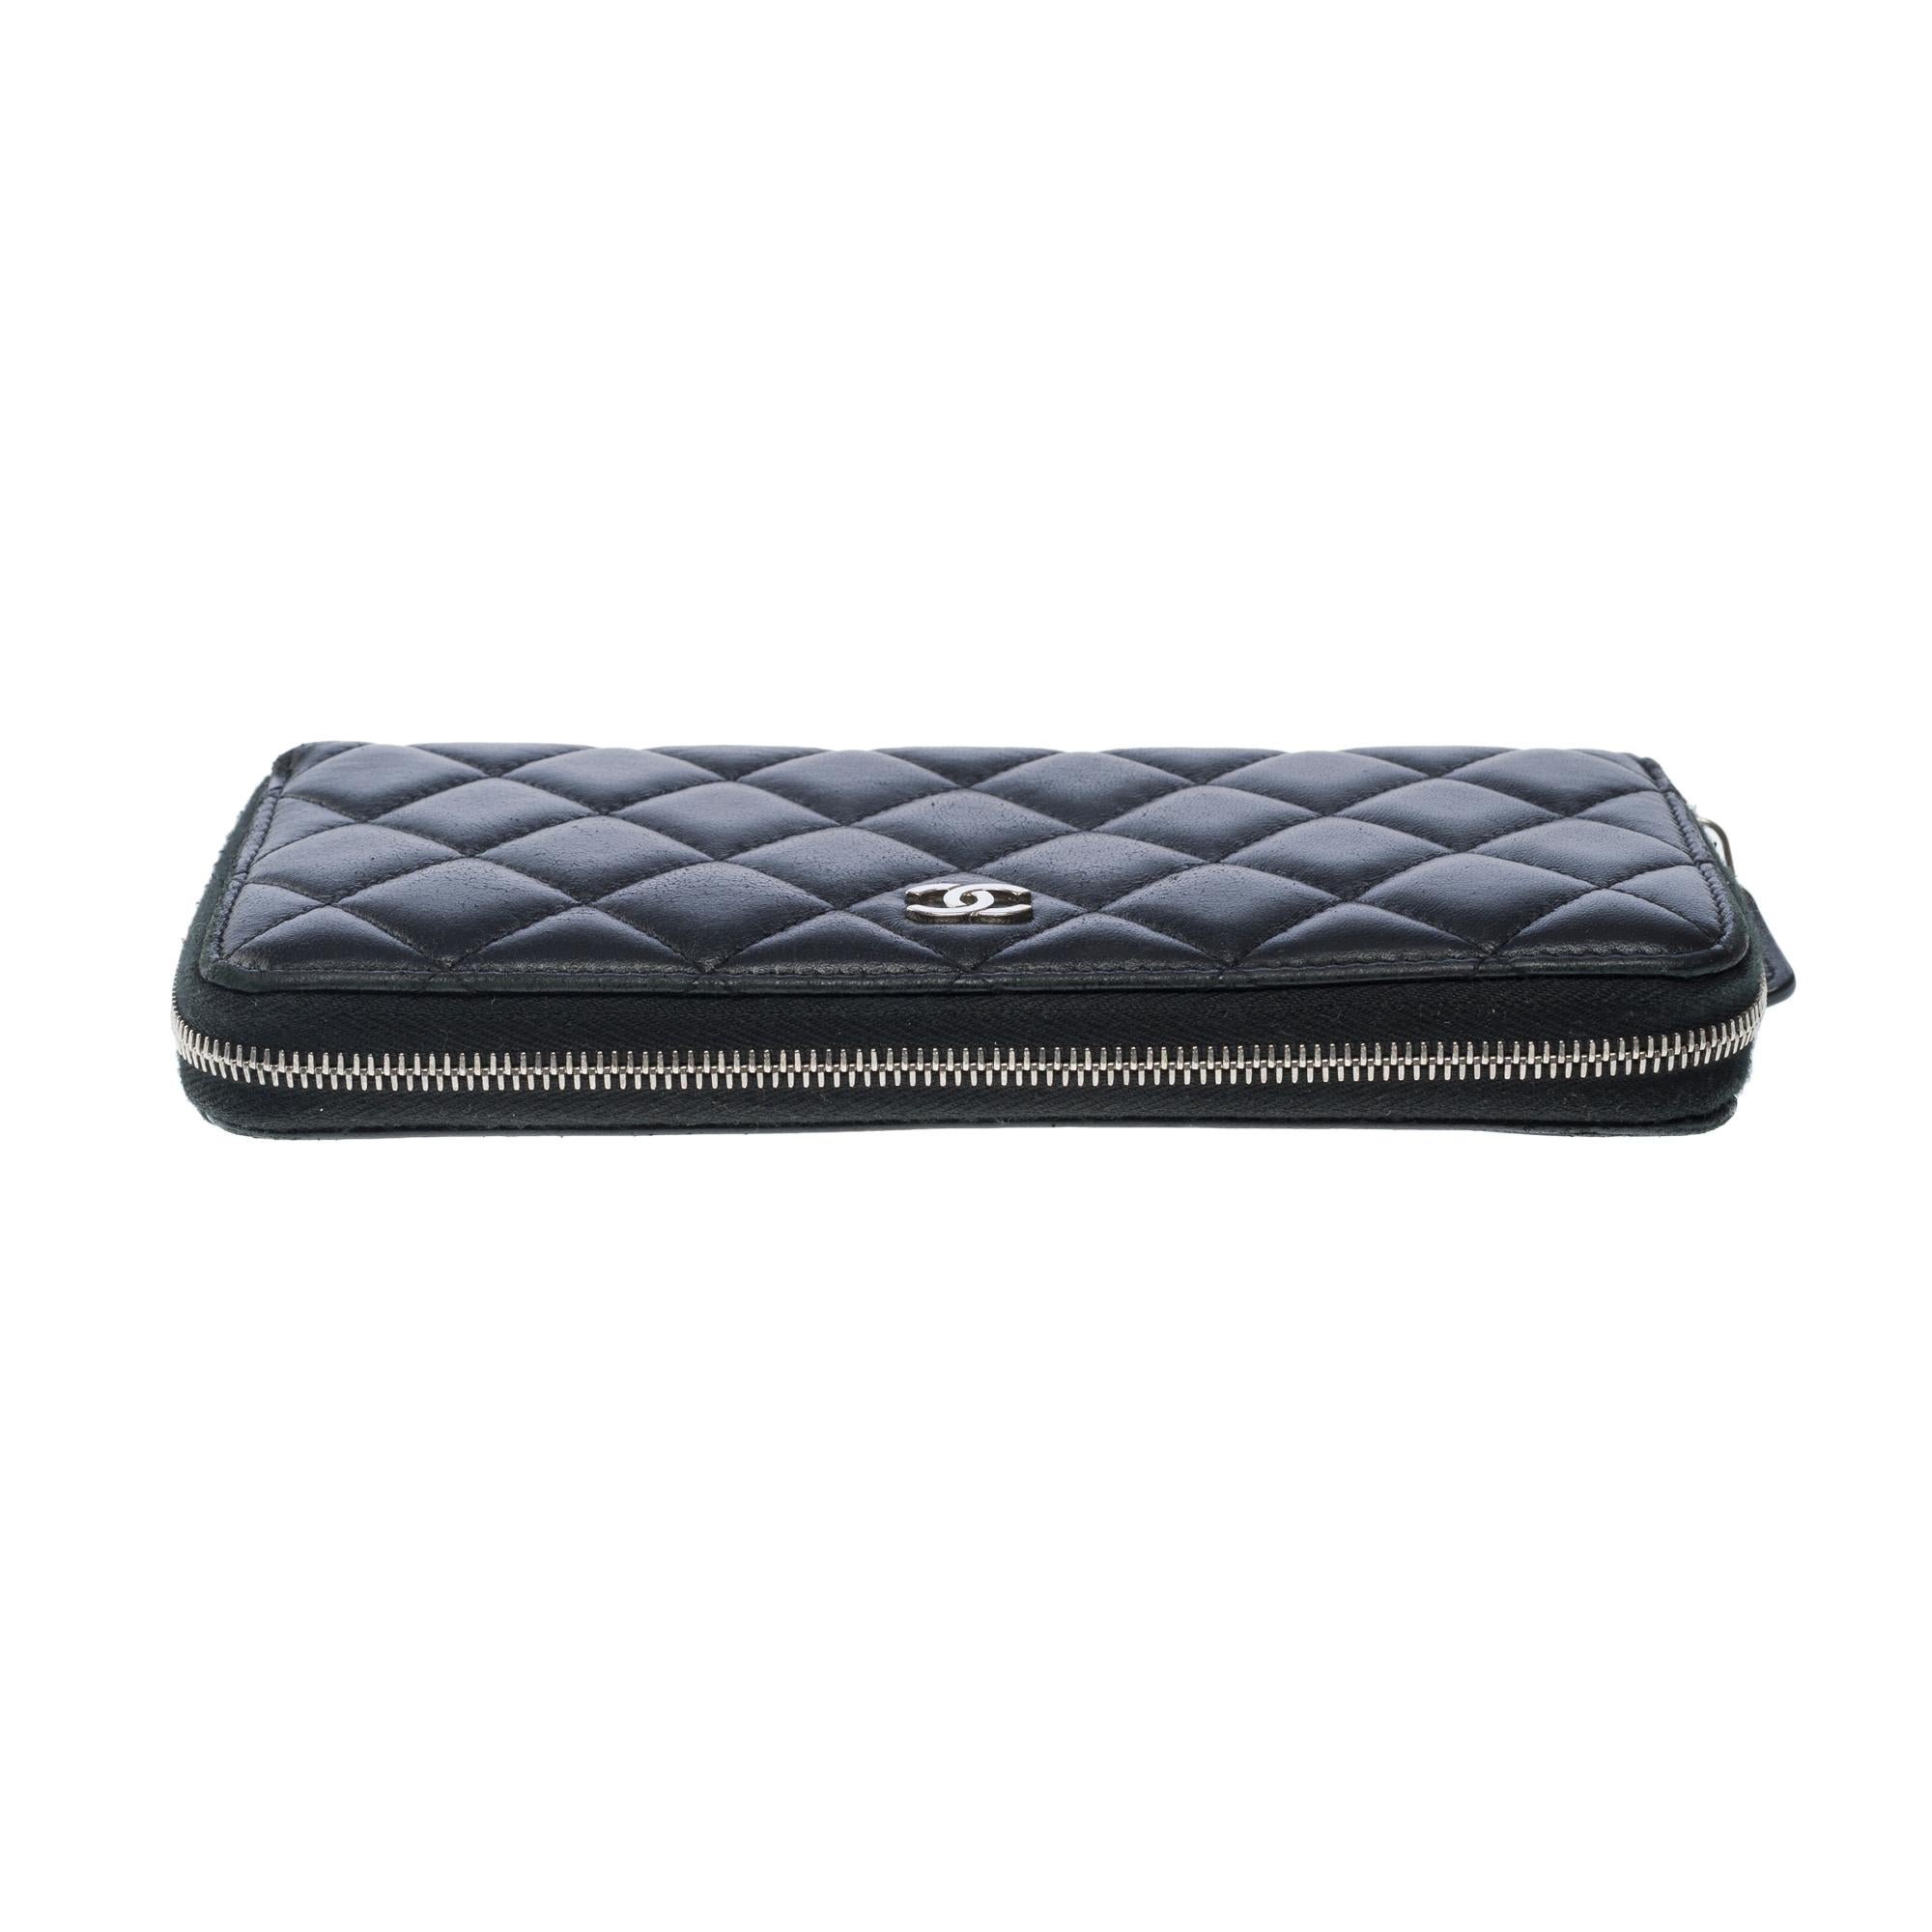 Lovely Chanel Compagnon Wallet in black quilted lambskin leather, SHW For Sale 7